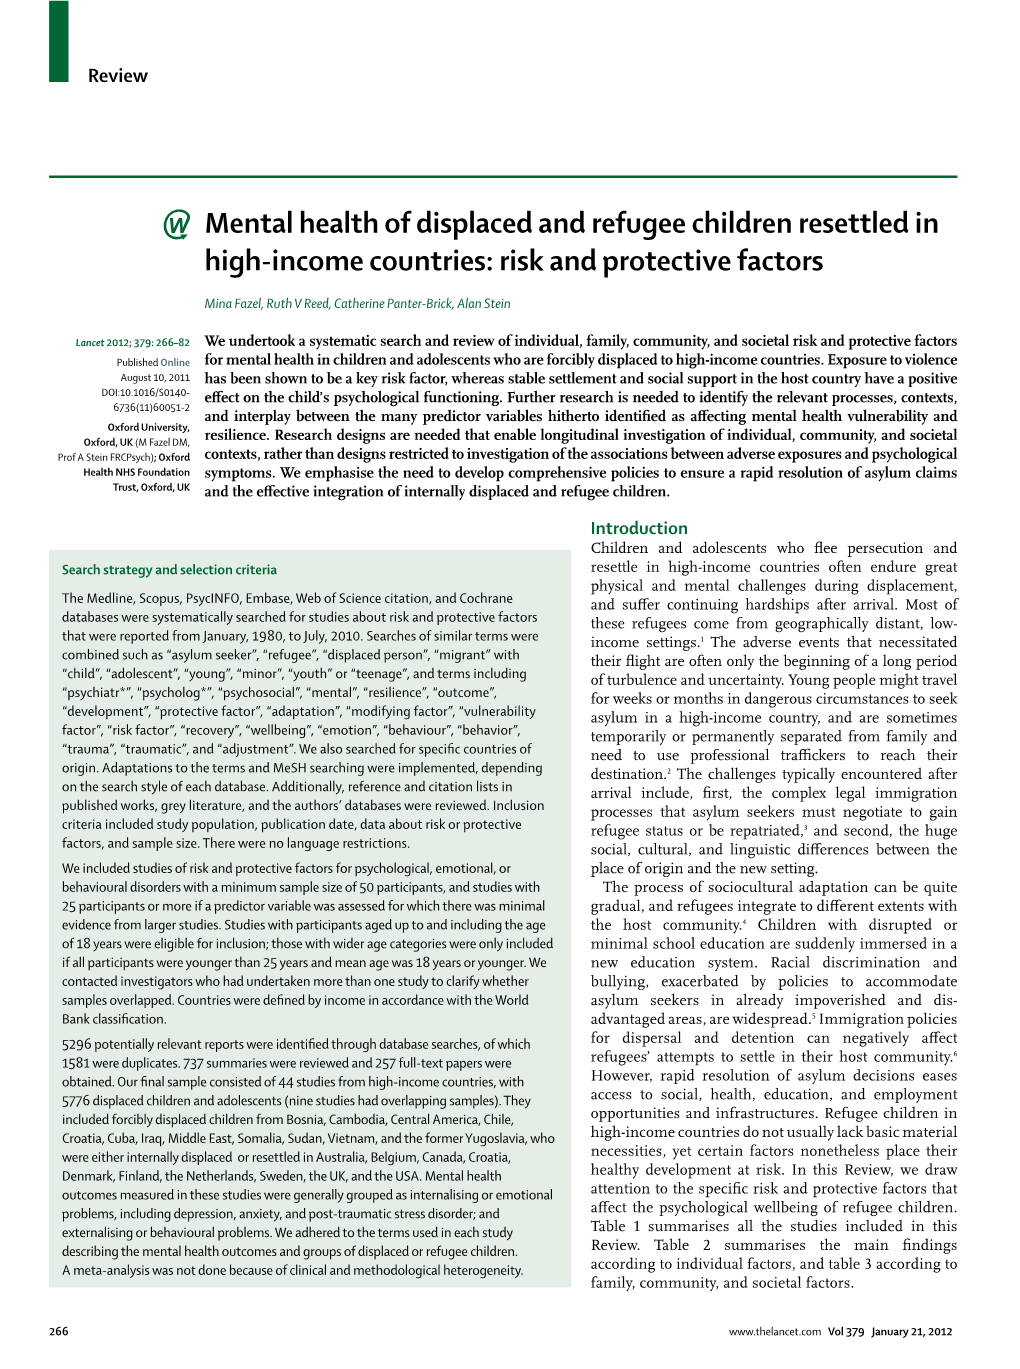 Mental Health of Displaced and Refugee Children Resettled in High-Income Countries: Risk and Protective Factors